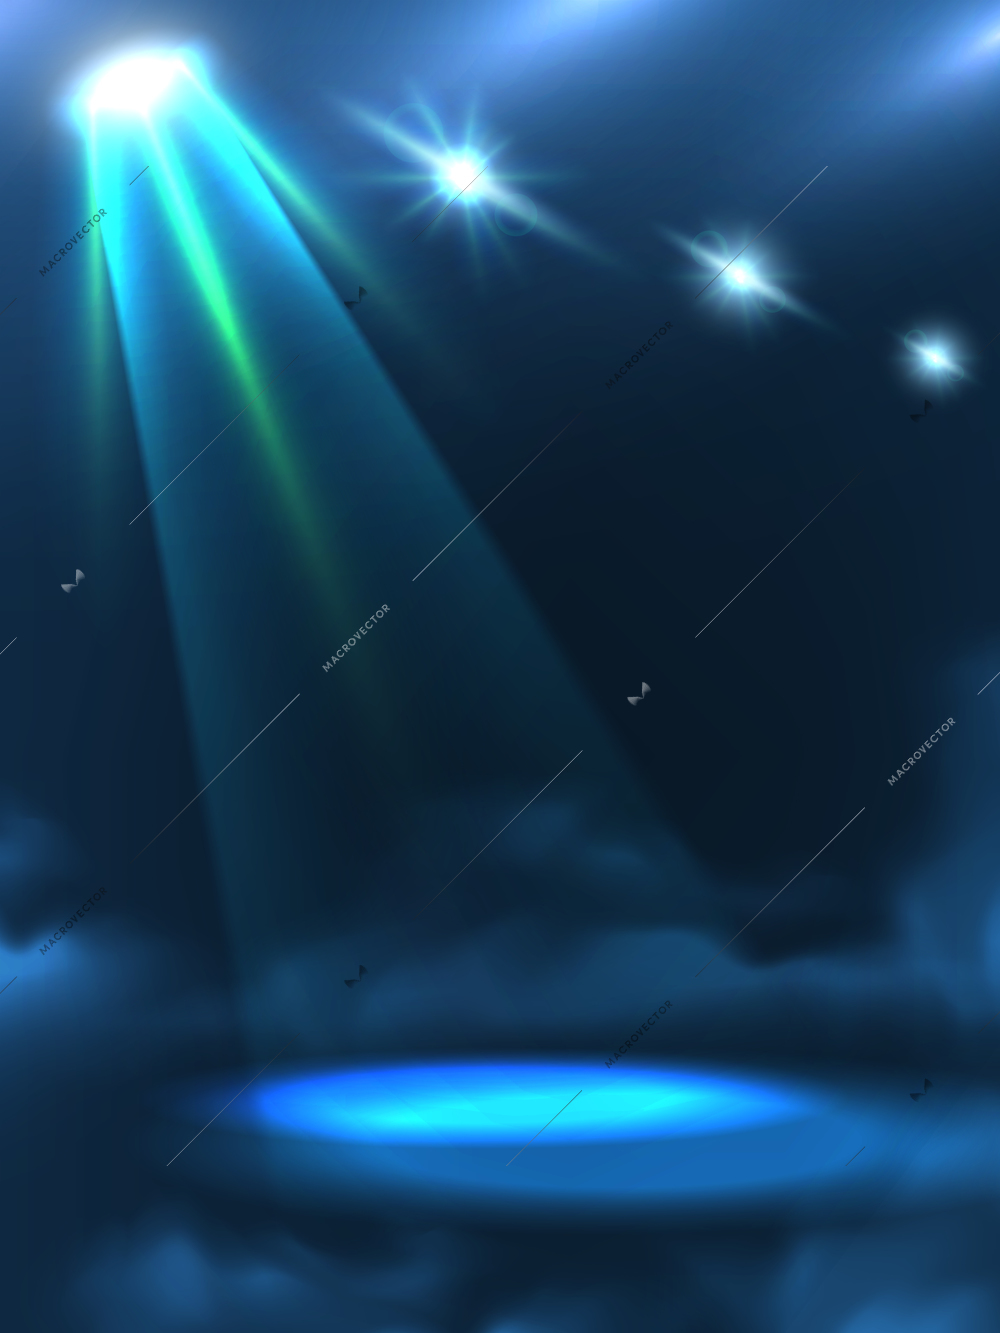 Blue green dim light beam and light spots in the darkness with clouds effect background abstract vector illustration